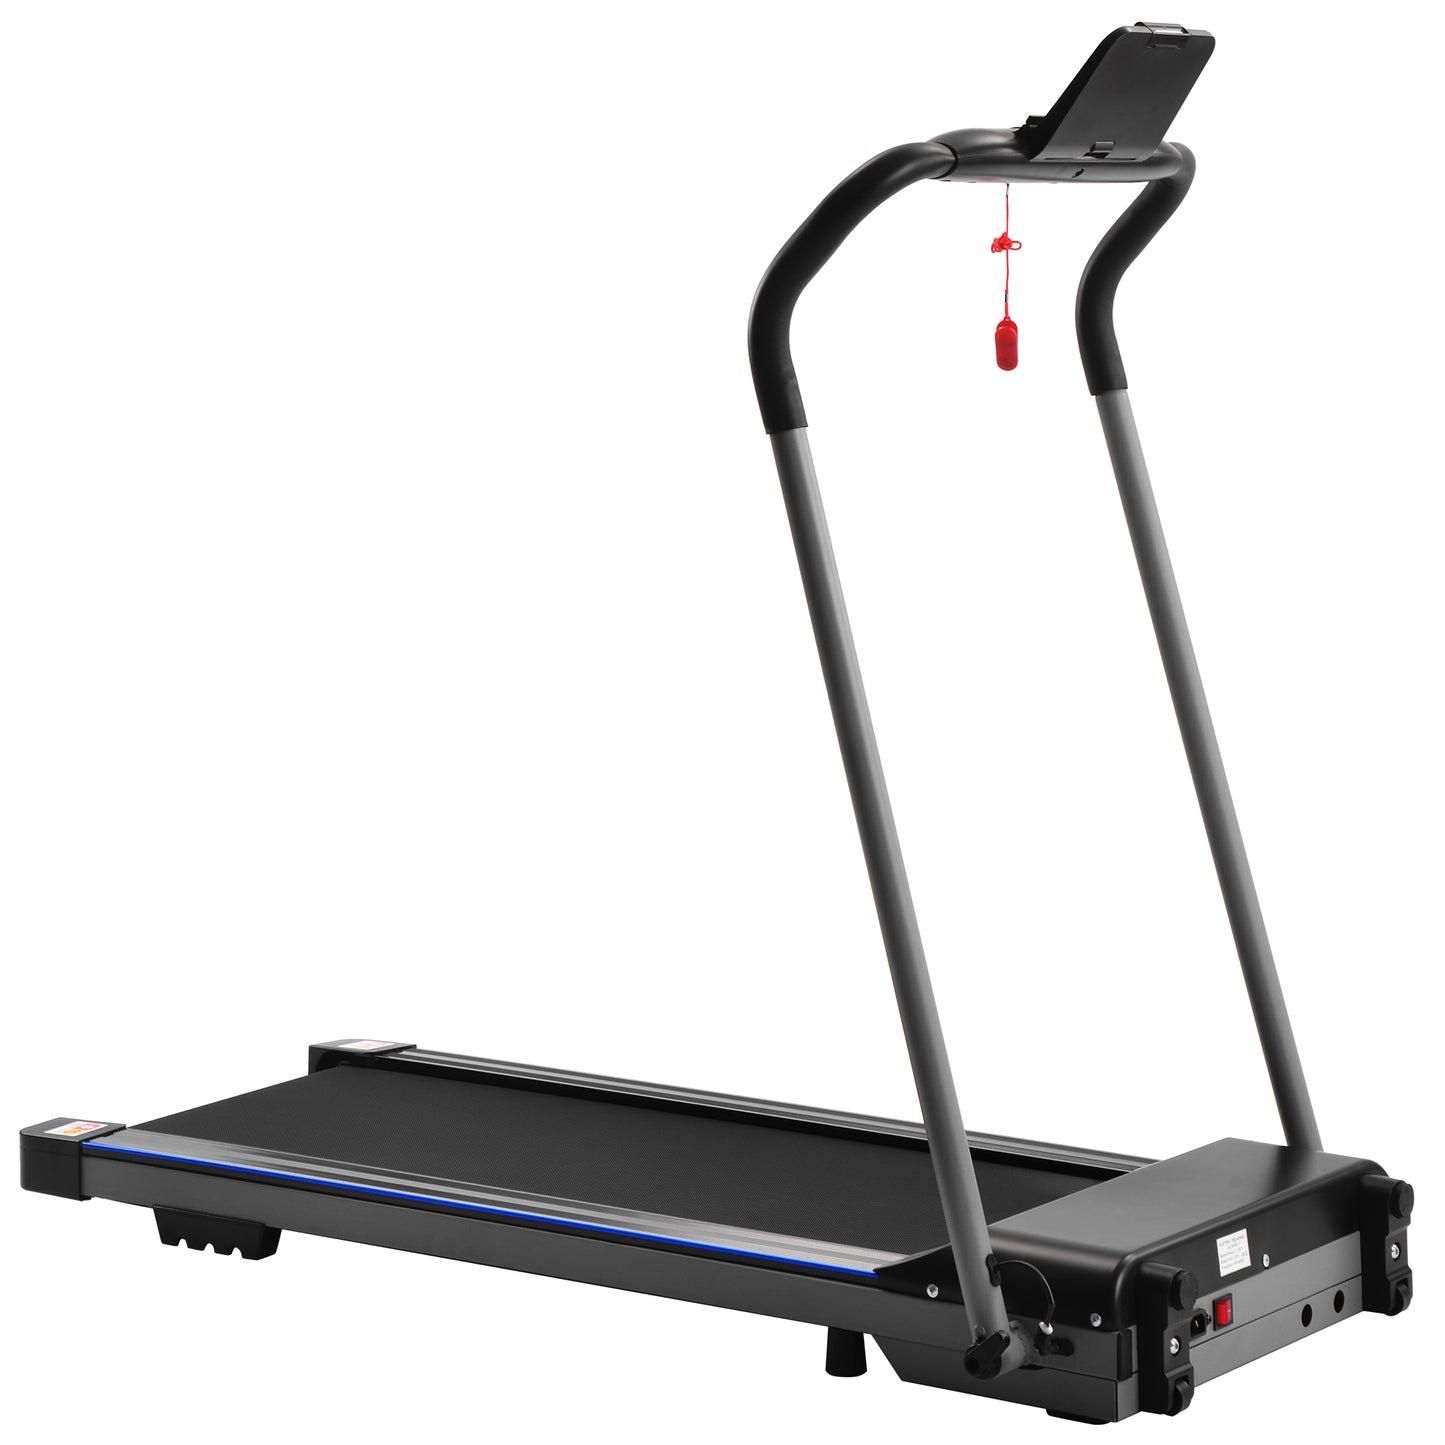 FYC Treadmill Folding Treadmill for Home Portable Electric Motorized Treadmill Running Exercise Machine Compact Treadmill for Home Gym Fitness Workout Jogging Walking, No tallation Required